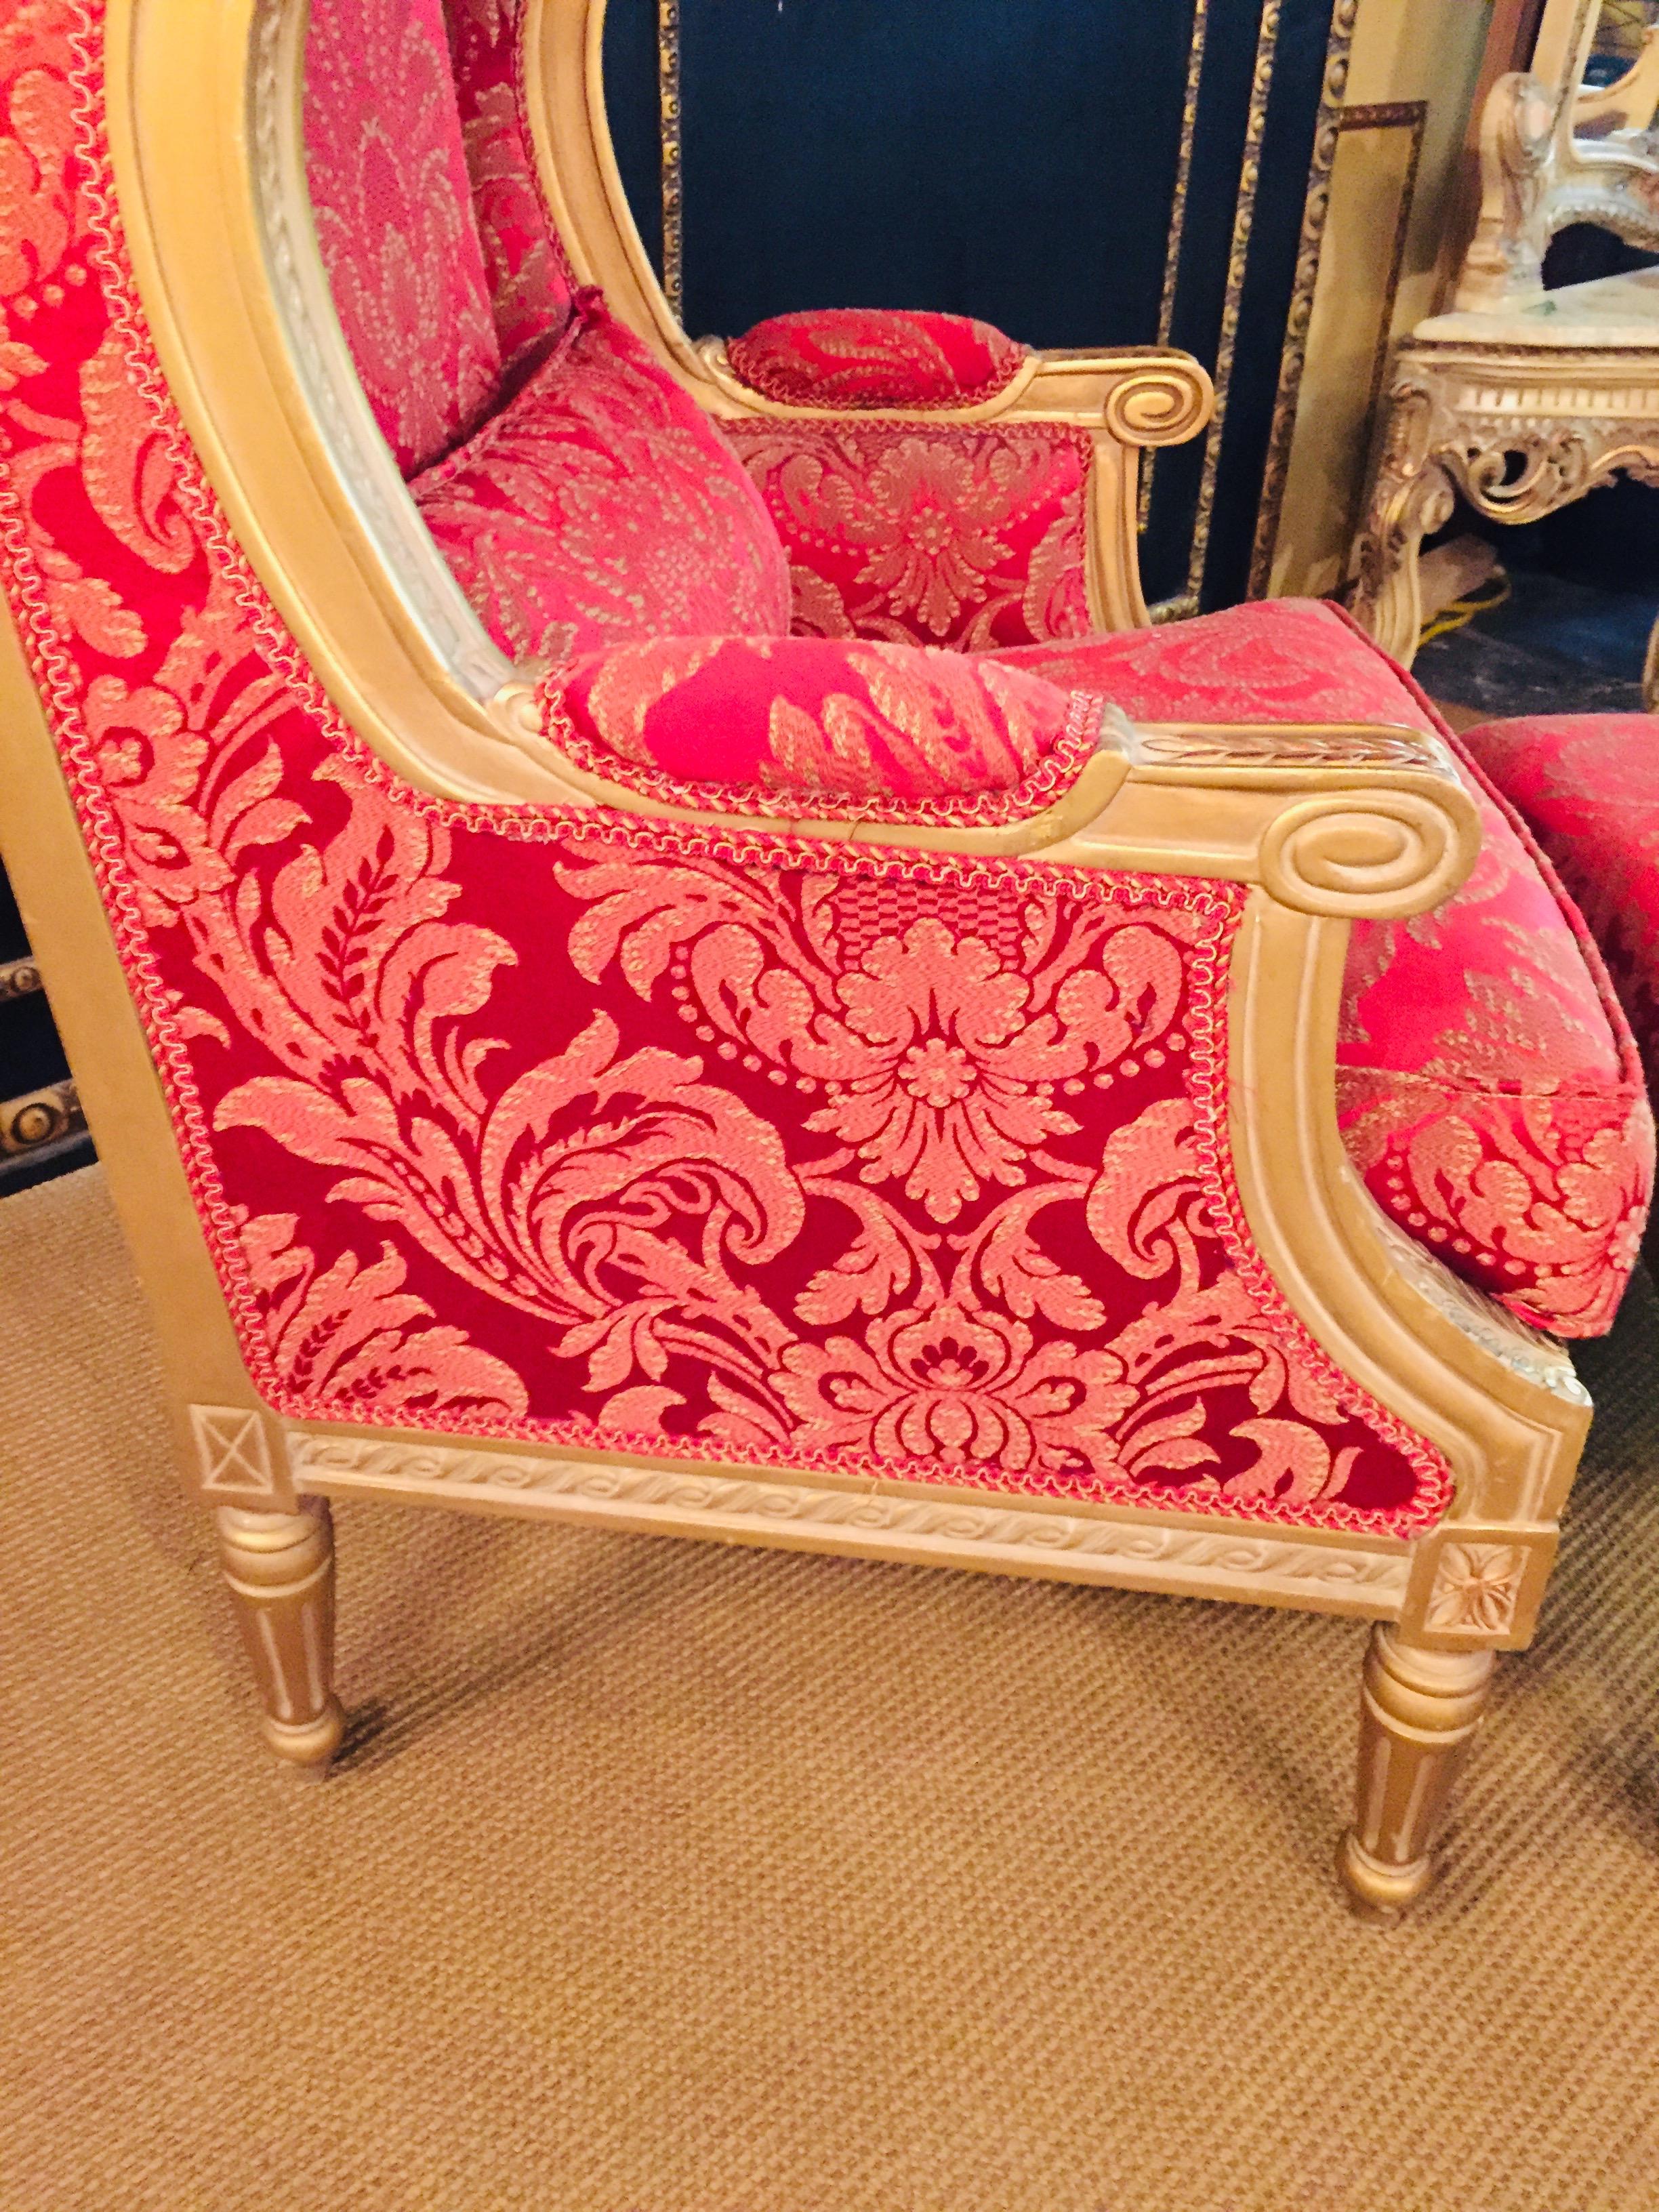 20th Century Bergere / Armchair with Stool in the Antique Style of Louis XVI